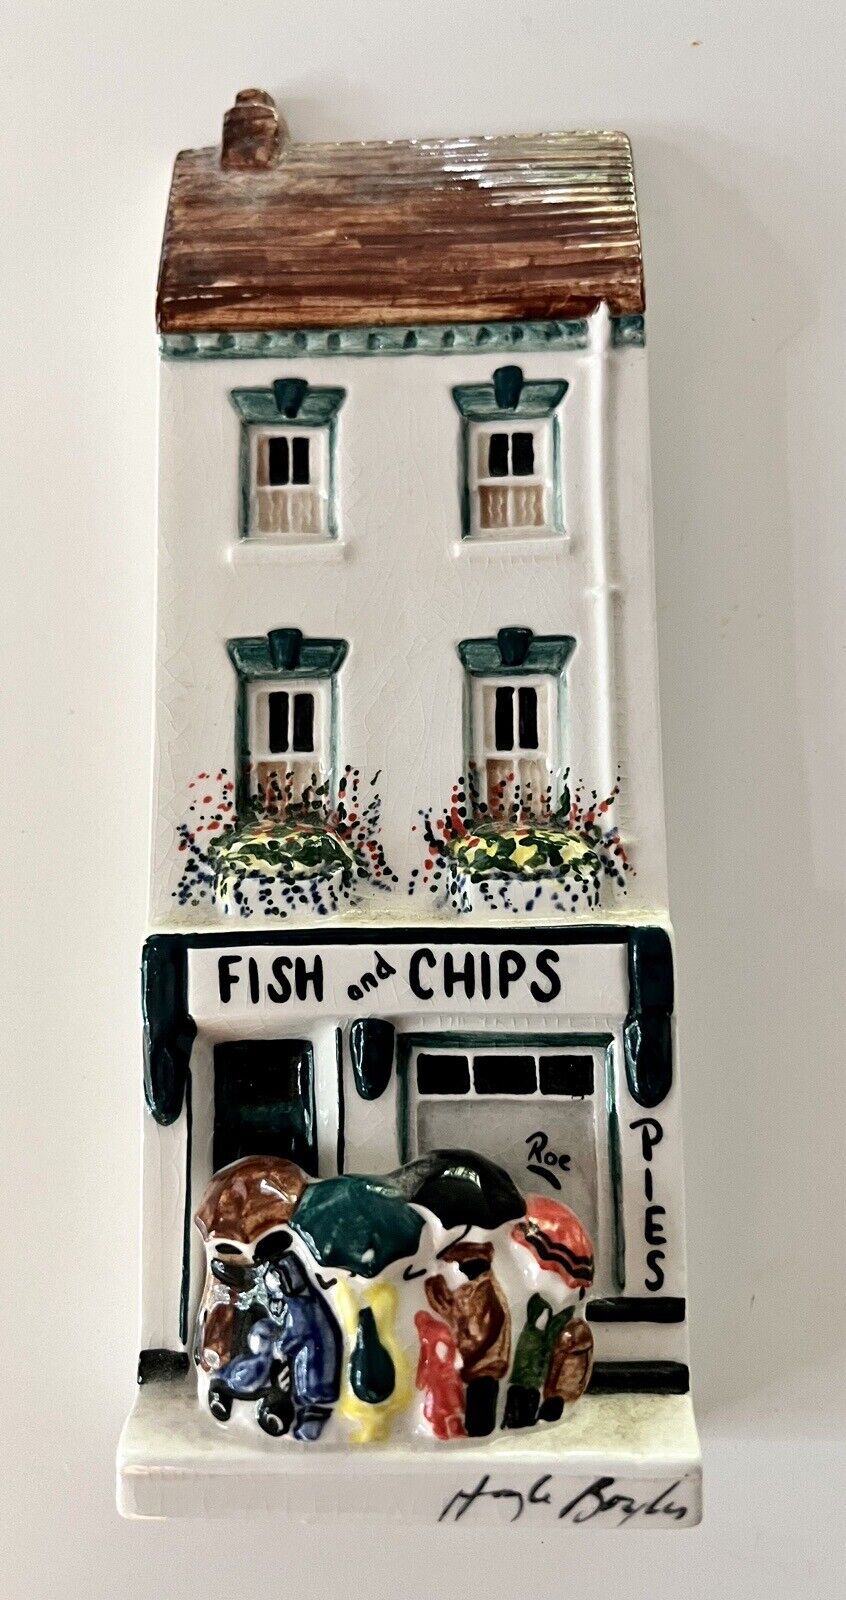 Hazle Ceramics - A Nation Of Shop Keepers - Fish And Chips - Pies  3” X 8.5”